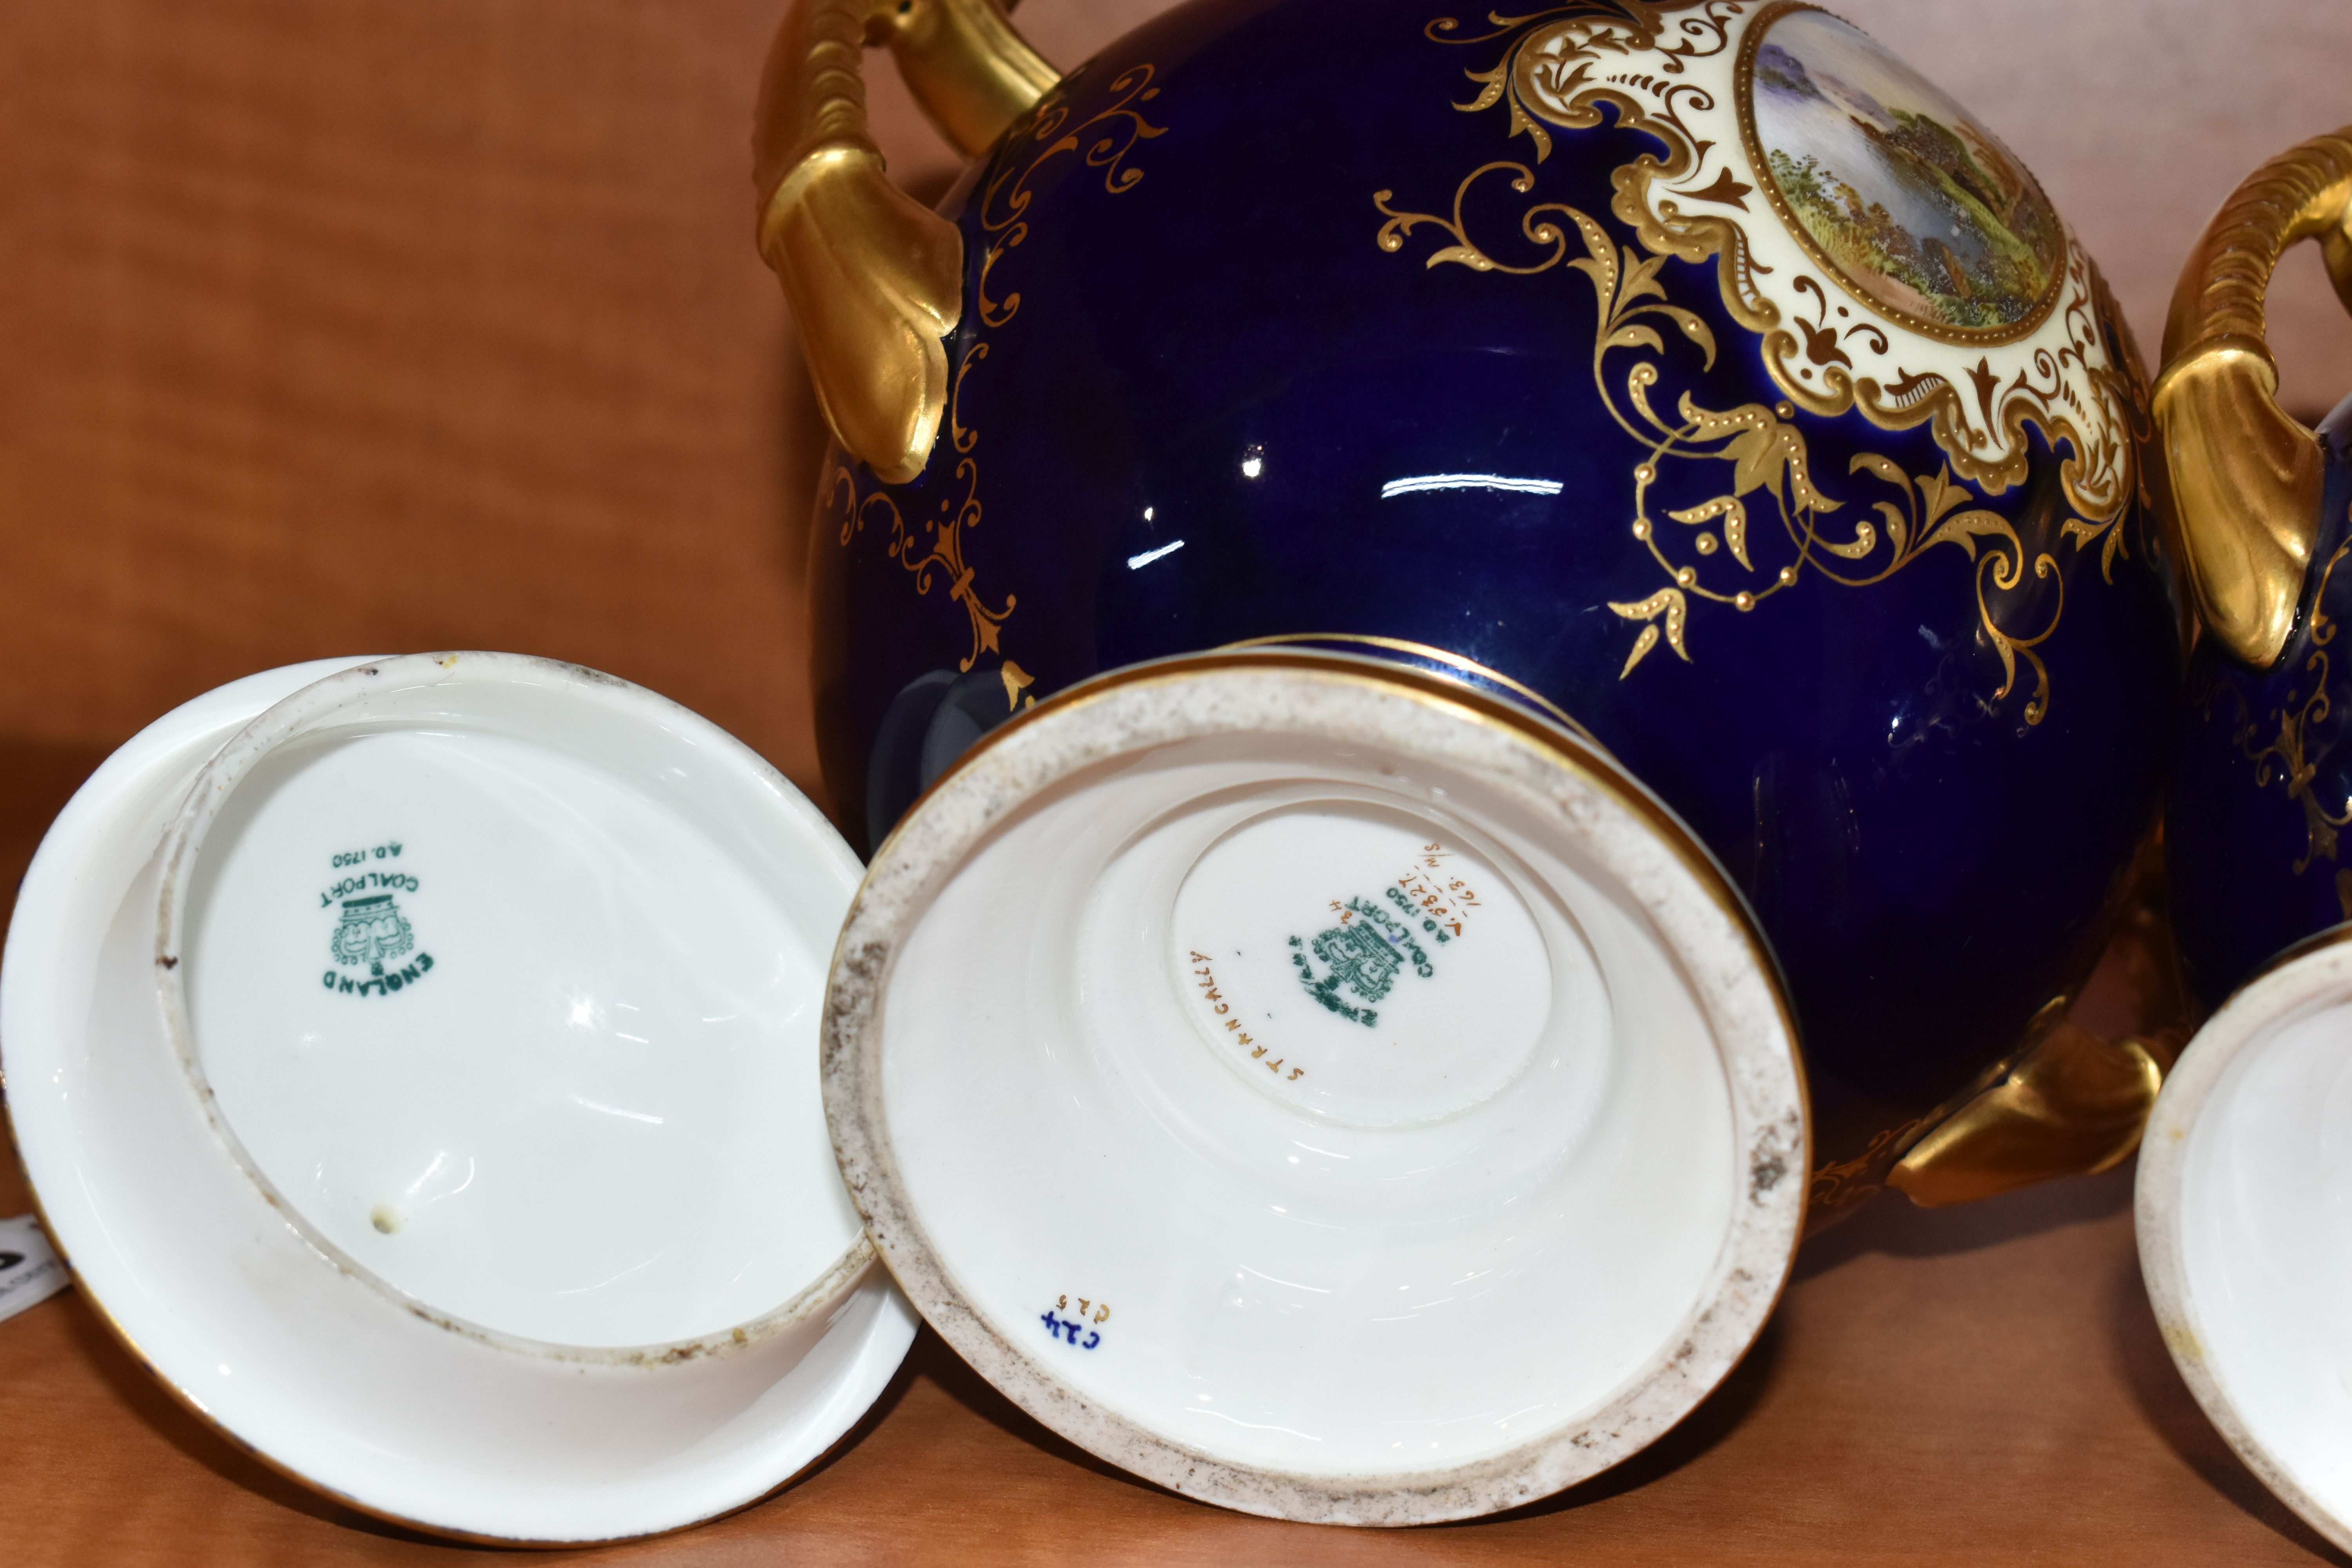 TWO EARLY 20TH CENTURY COALPORT TWIN HANDLED VASES AND COVERS, blue, pale yellow and gilt ground, - Image 11 of 12